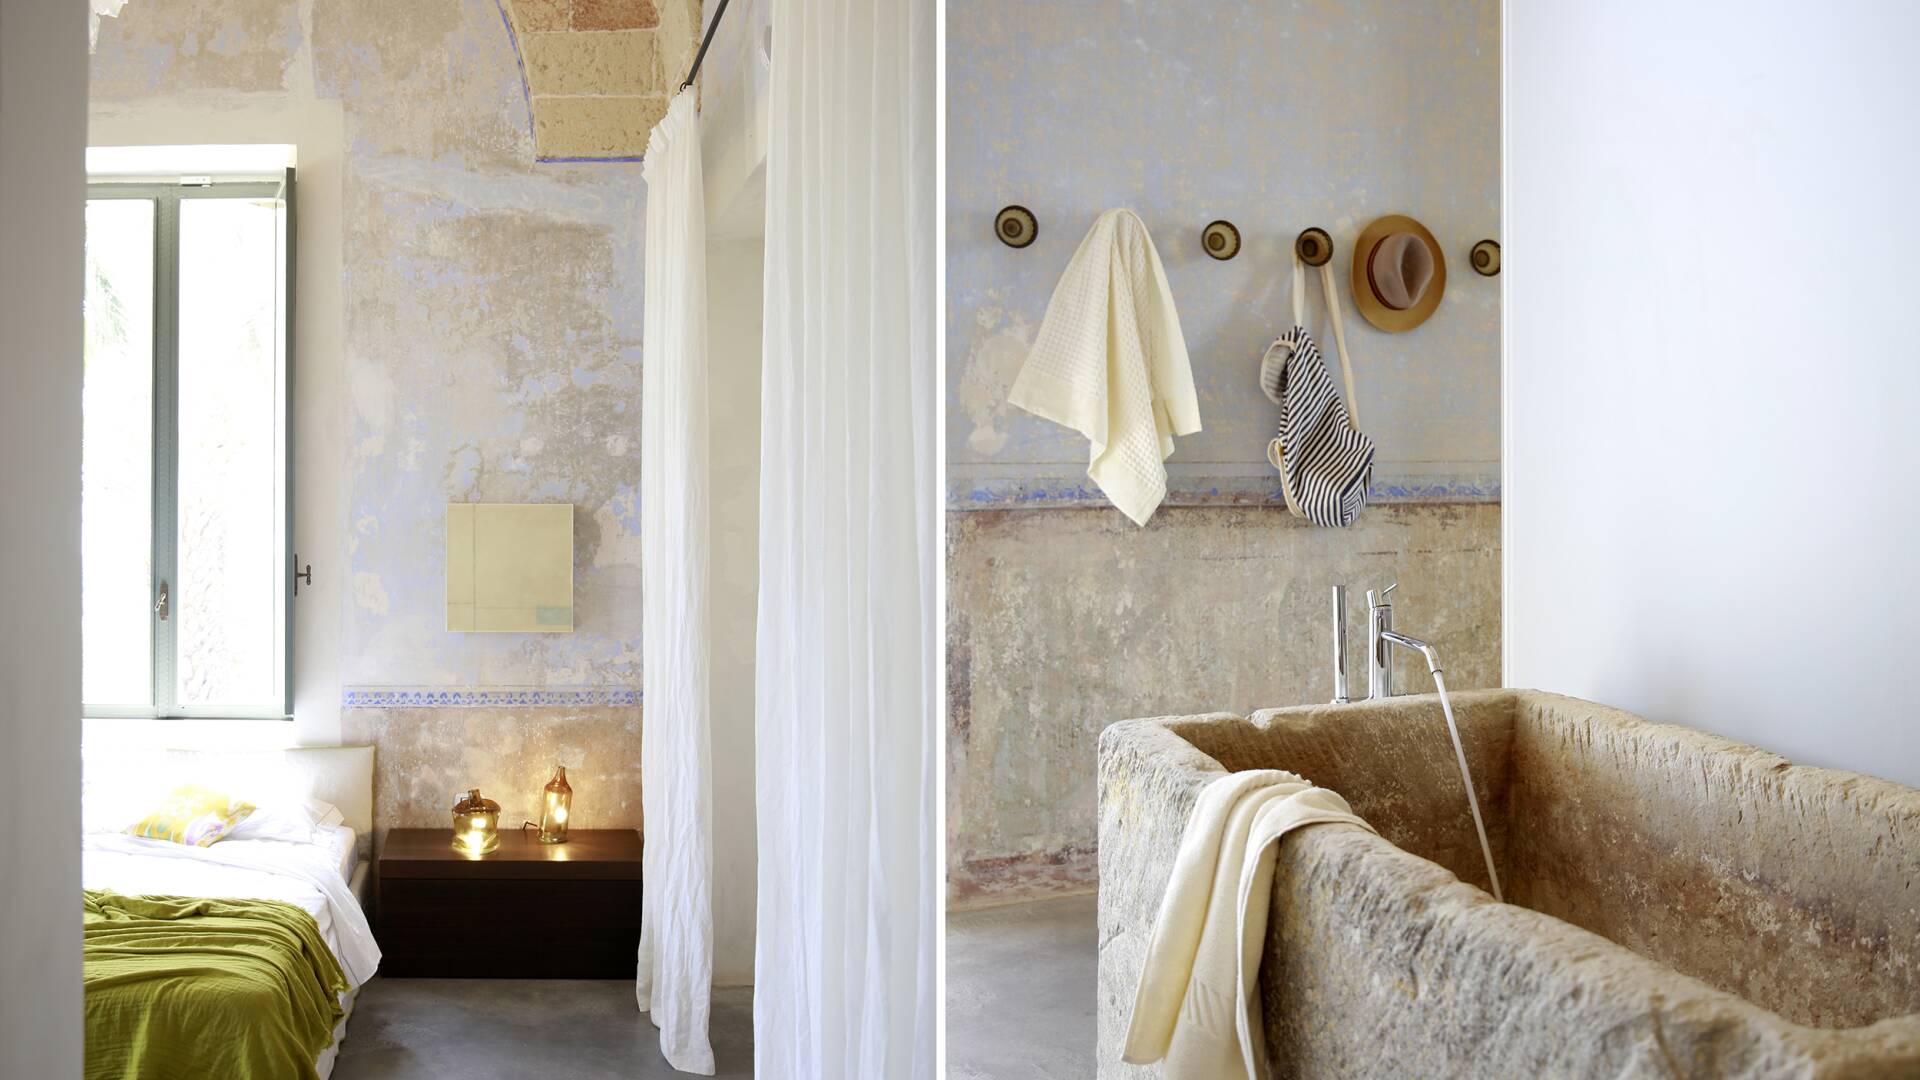 exclusive bath tub with local stone